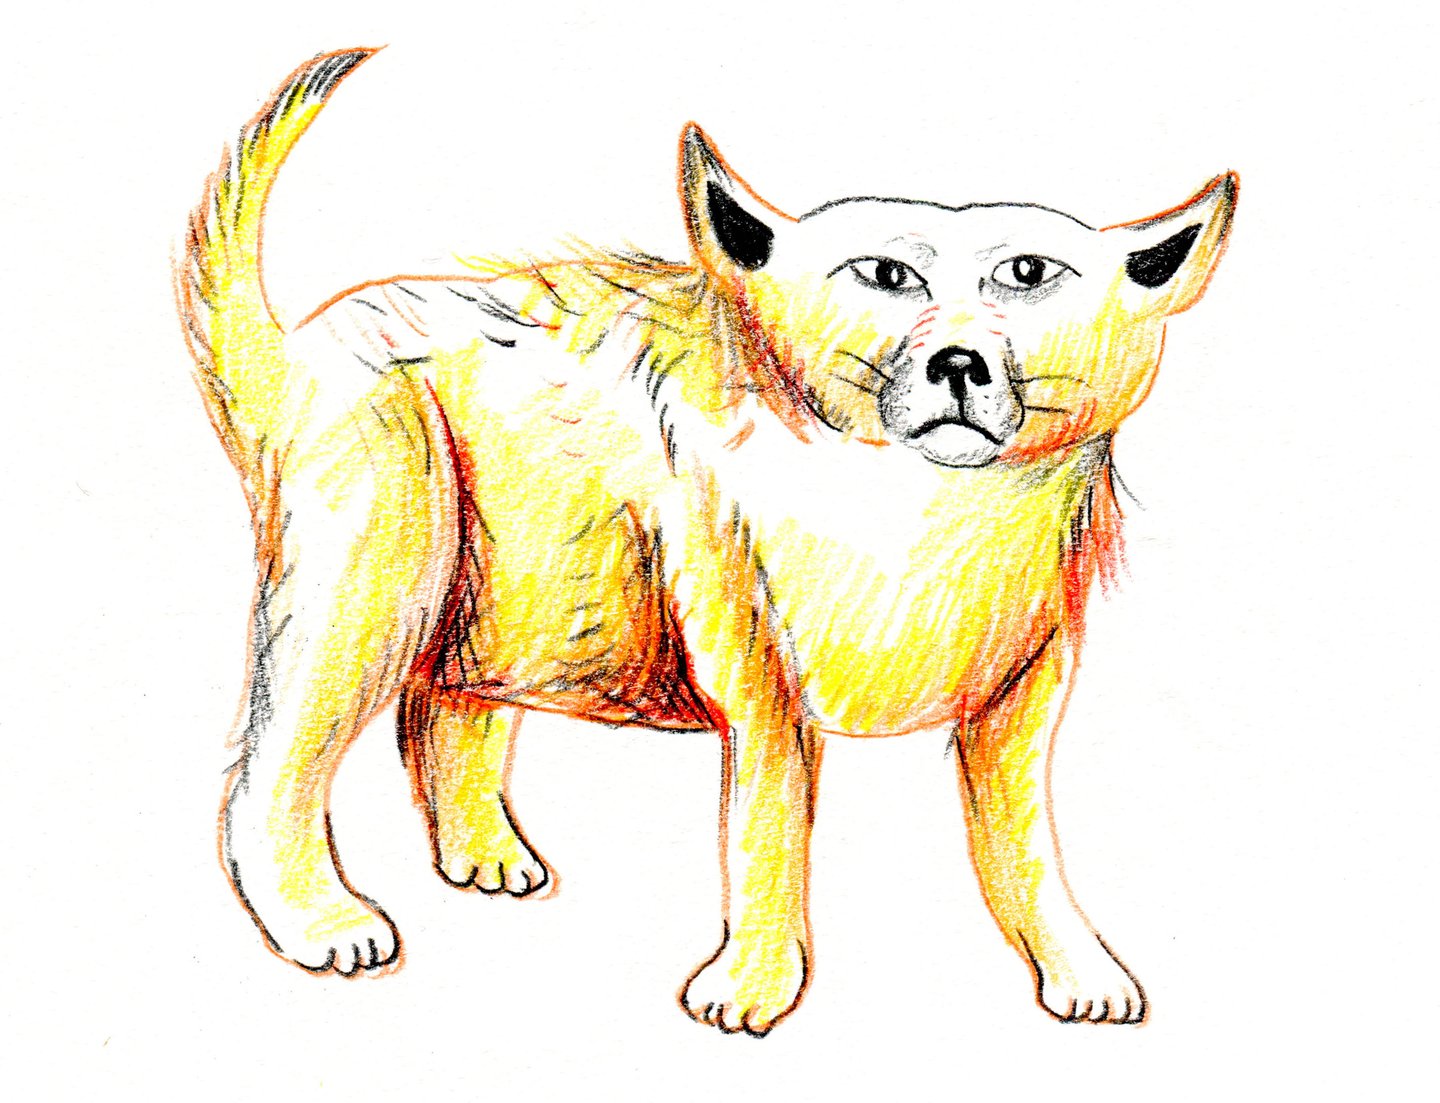 There is a yellow and orangish colored pencil illustration of a Chihuahua in profile. The Chihuahua's head is exaggerated in a humorous way. 